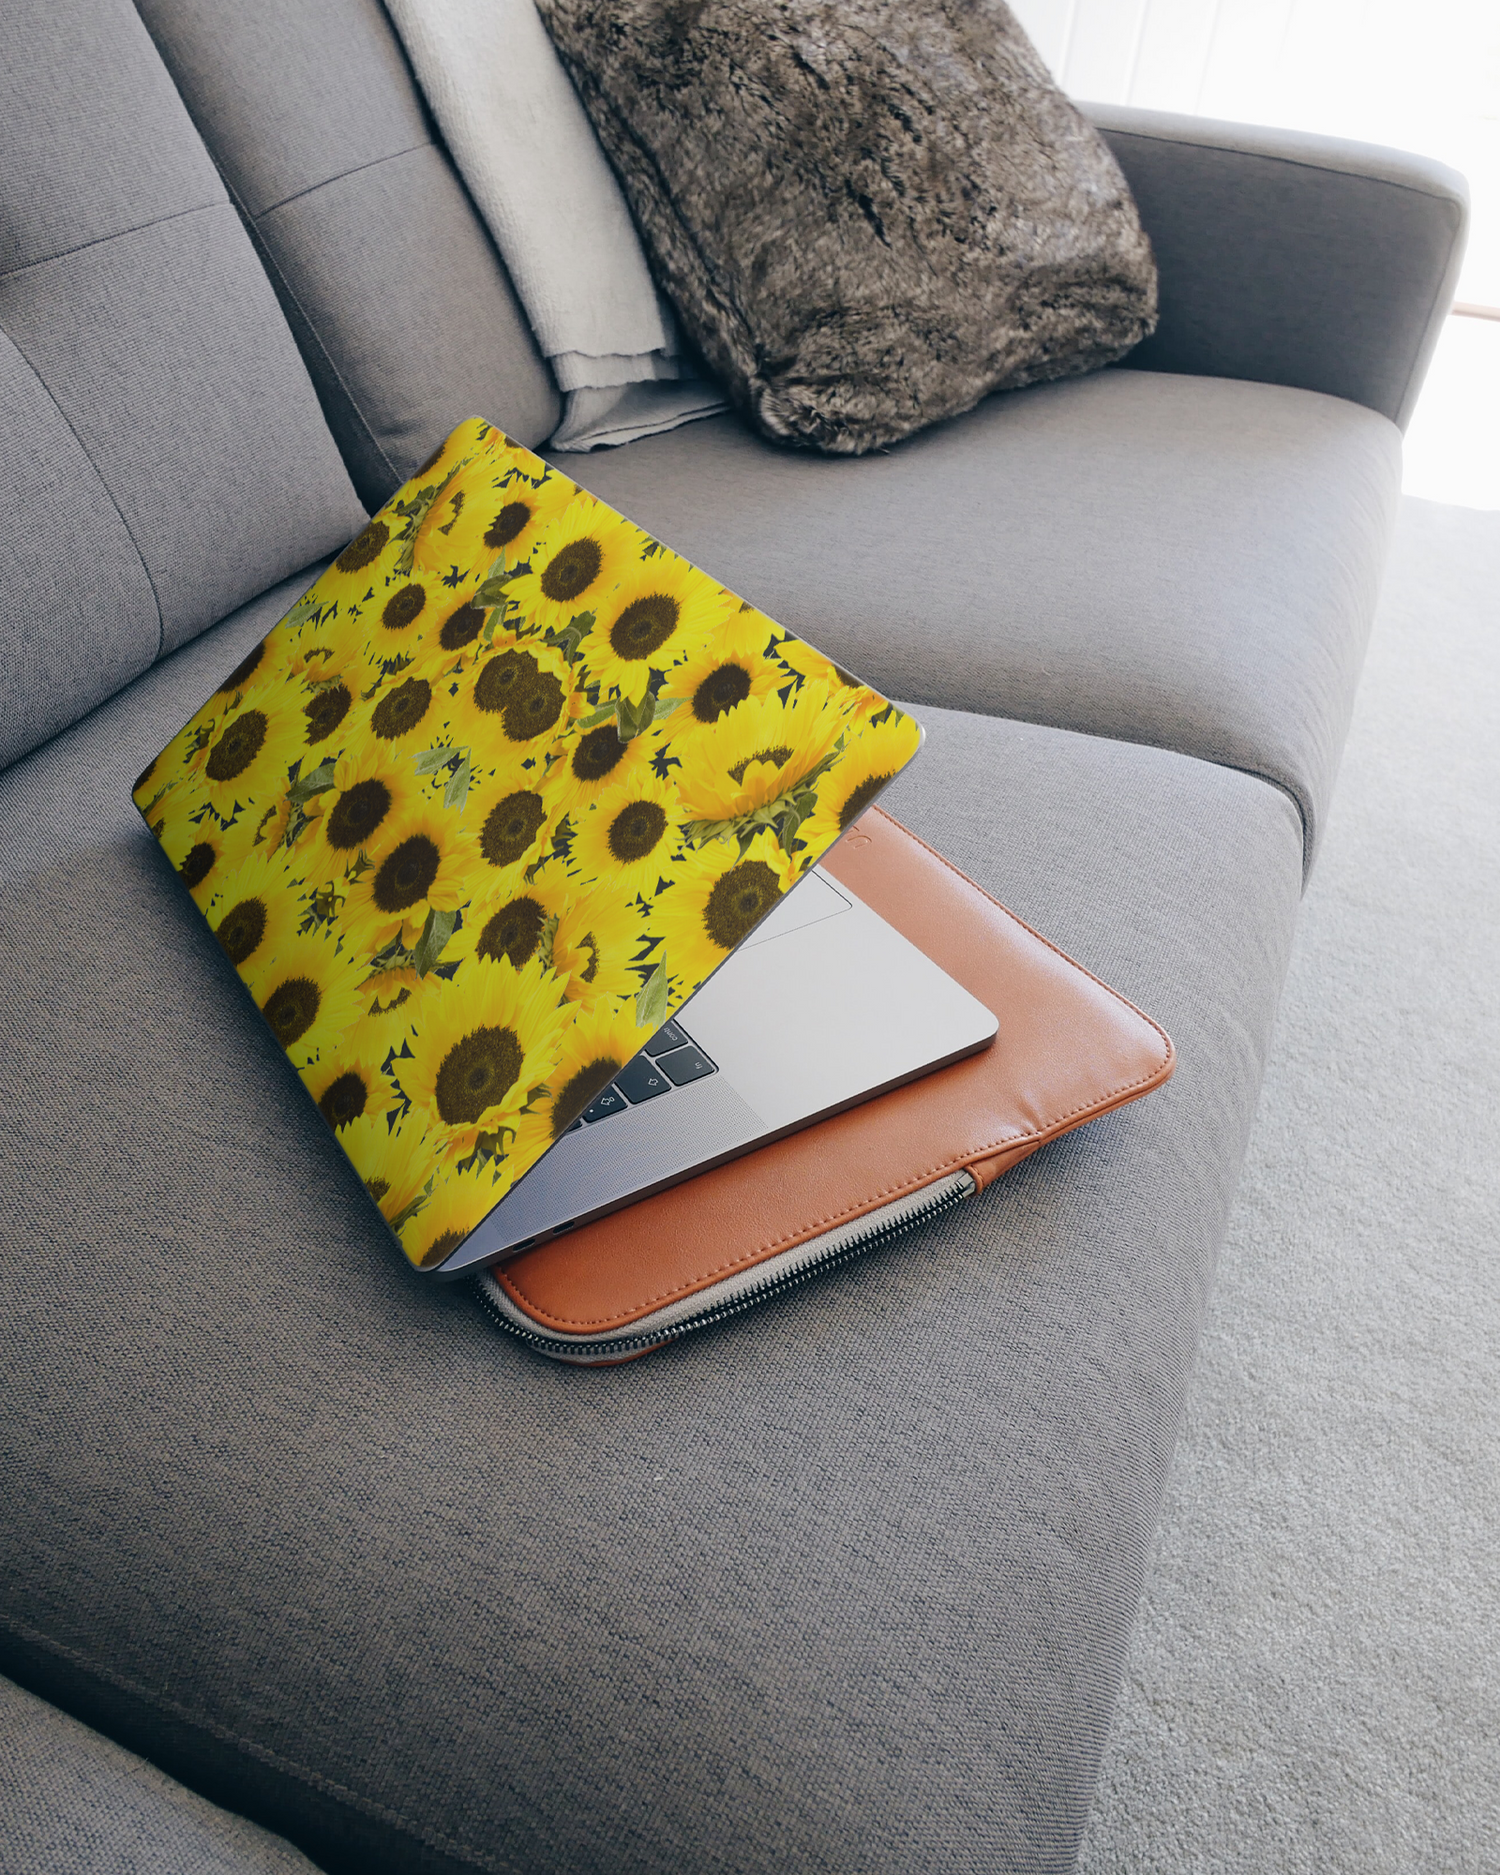 Sunflowers Laptop Skin for 15 inch Apple MacBooks on a couch